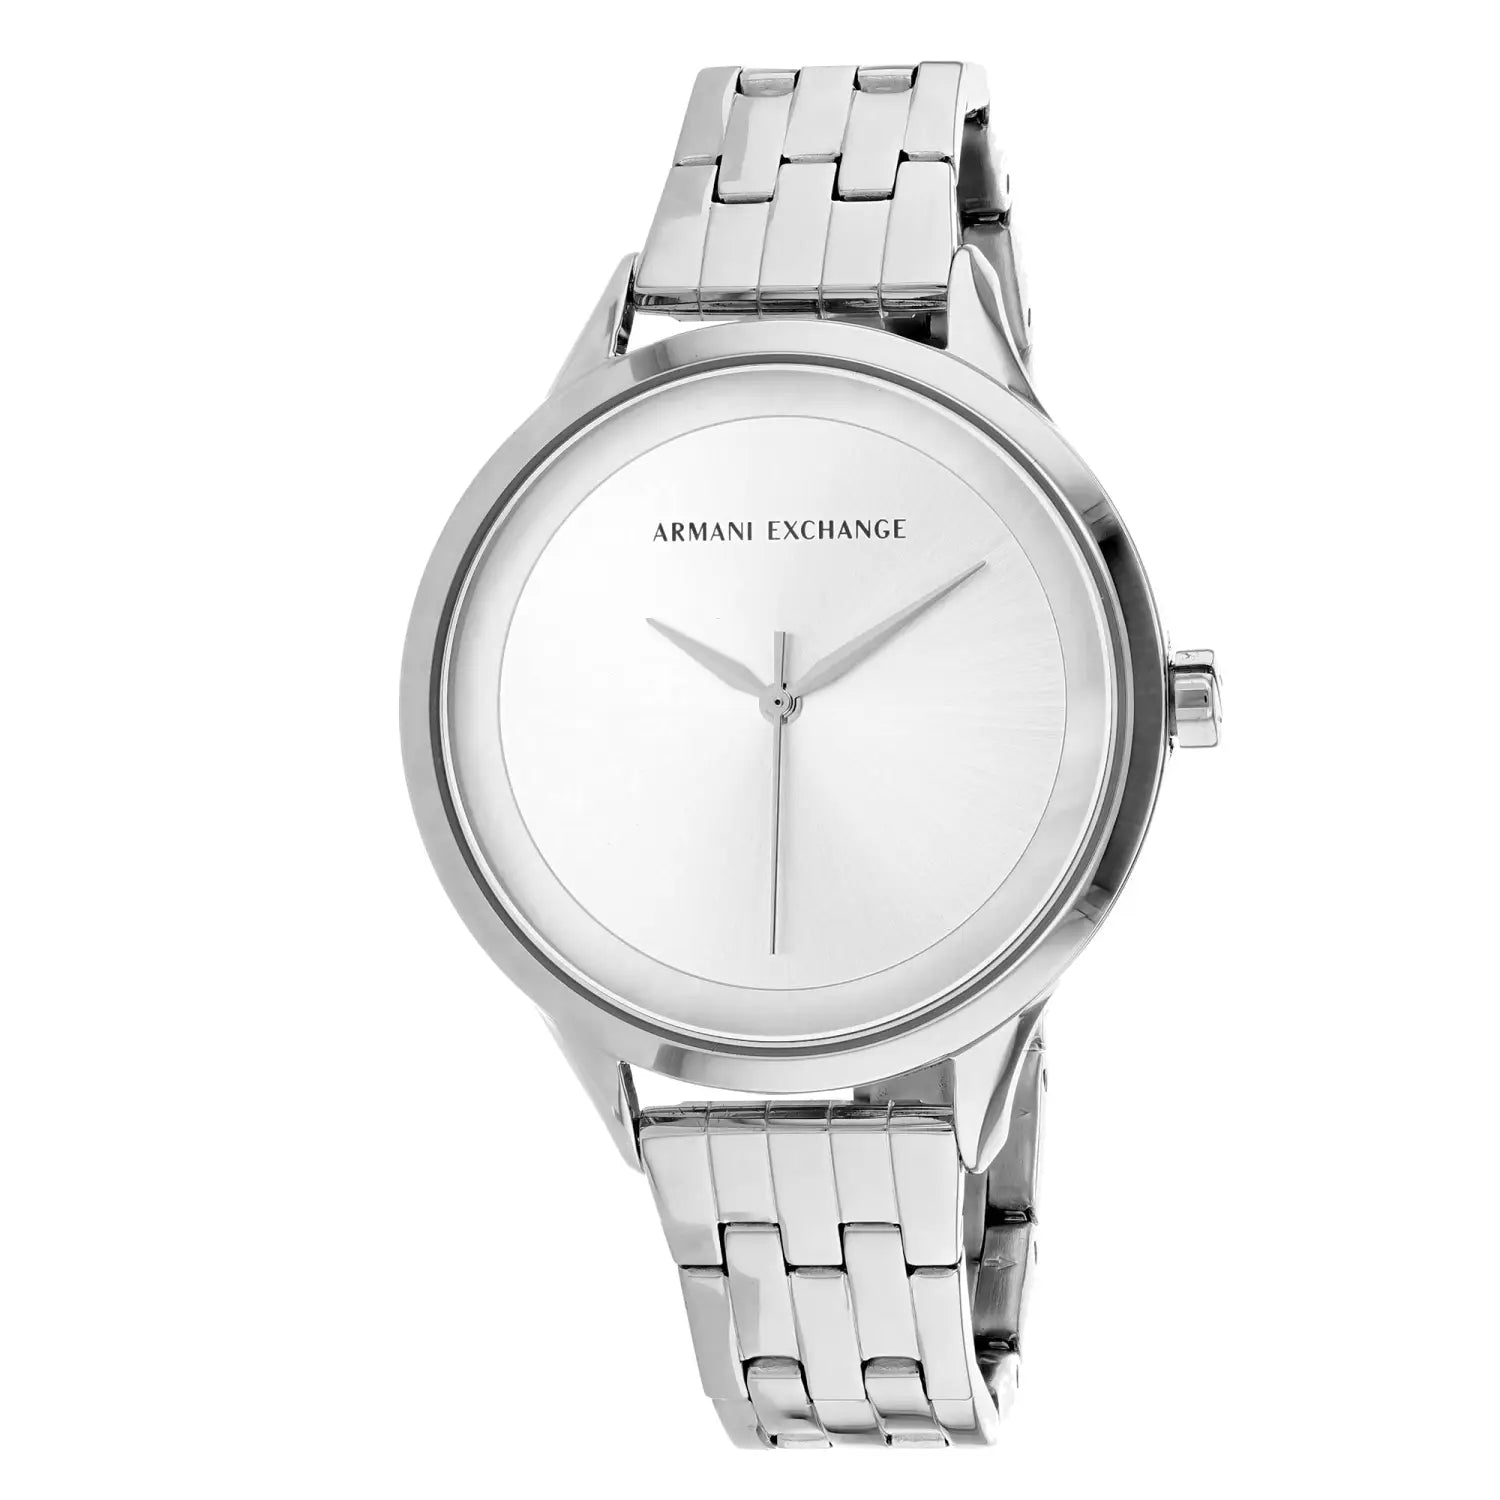 Armani Exchange Women’s Classic Stainless Steel Silver Tone